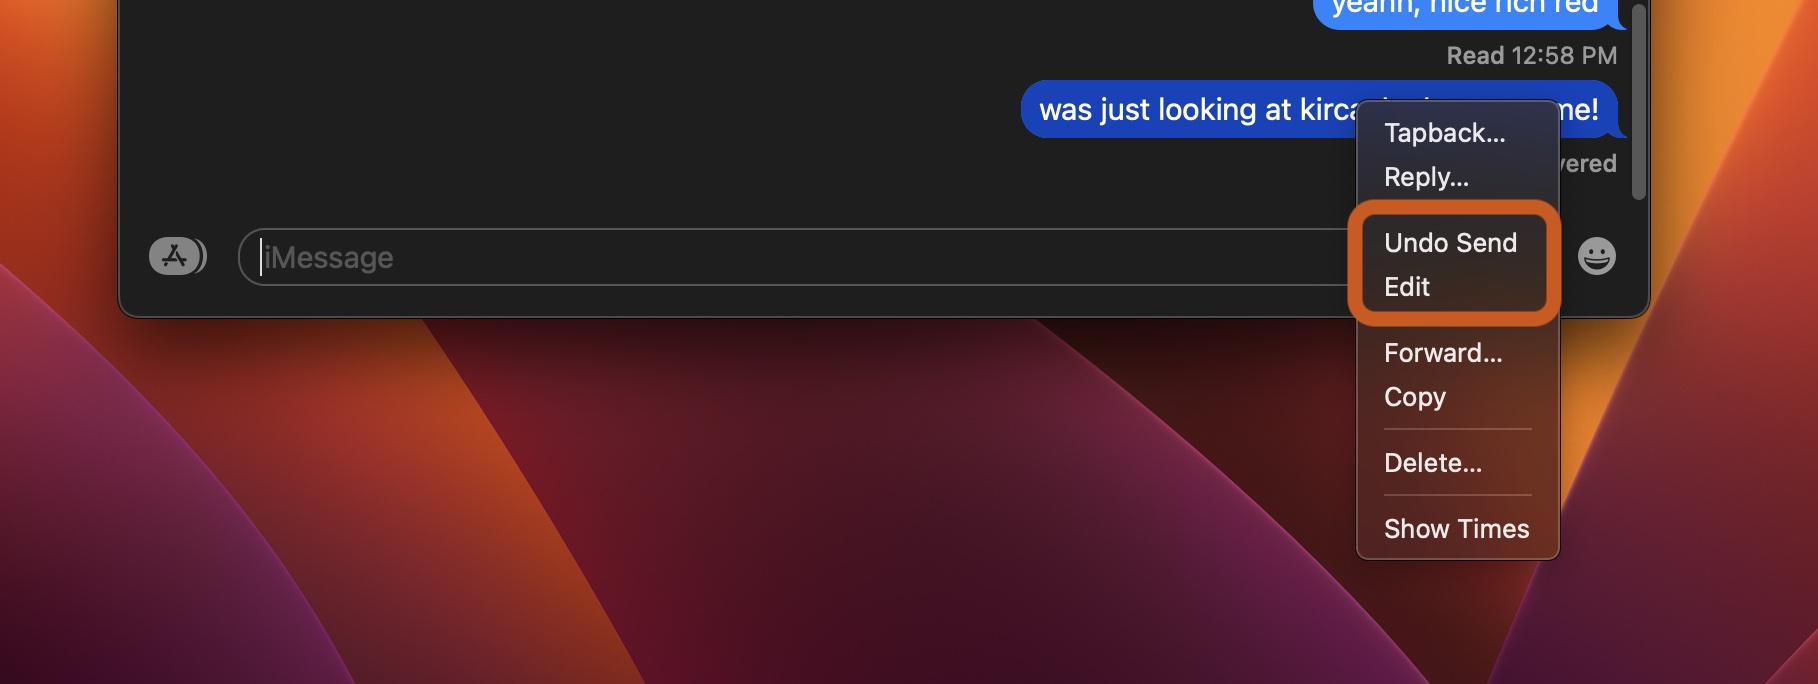 macOS Ventura features Messages unsend and edit